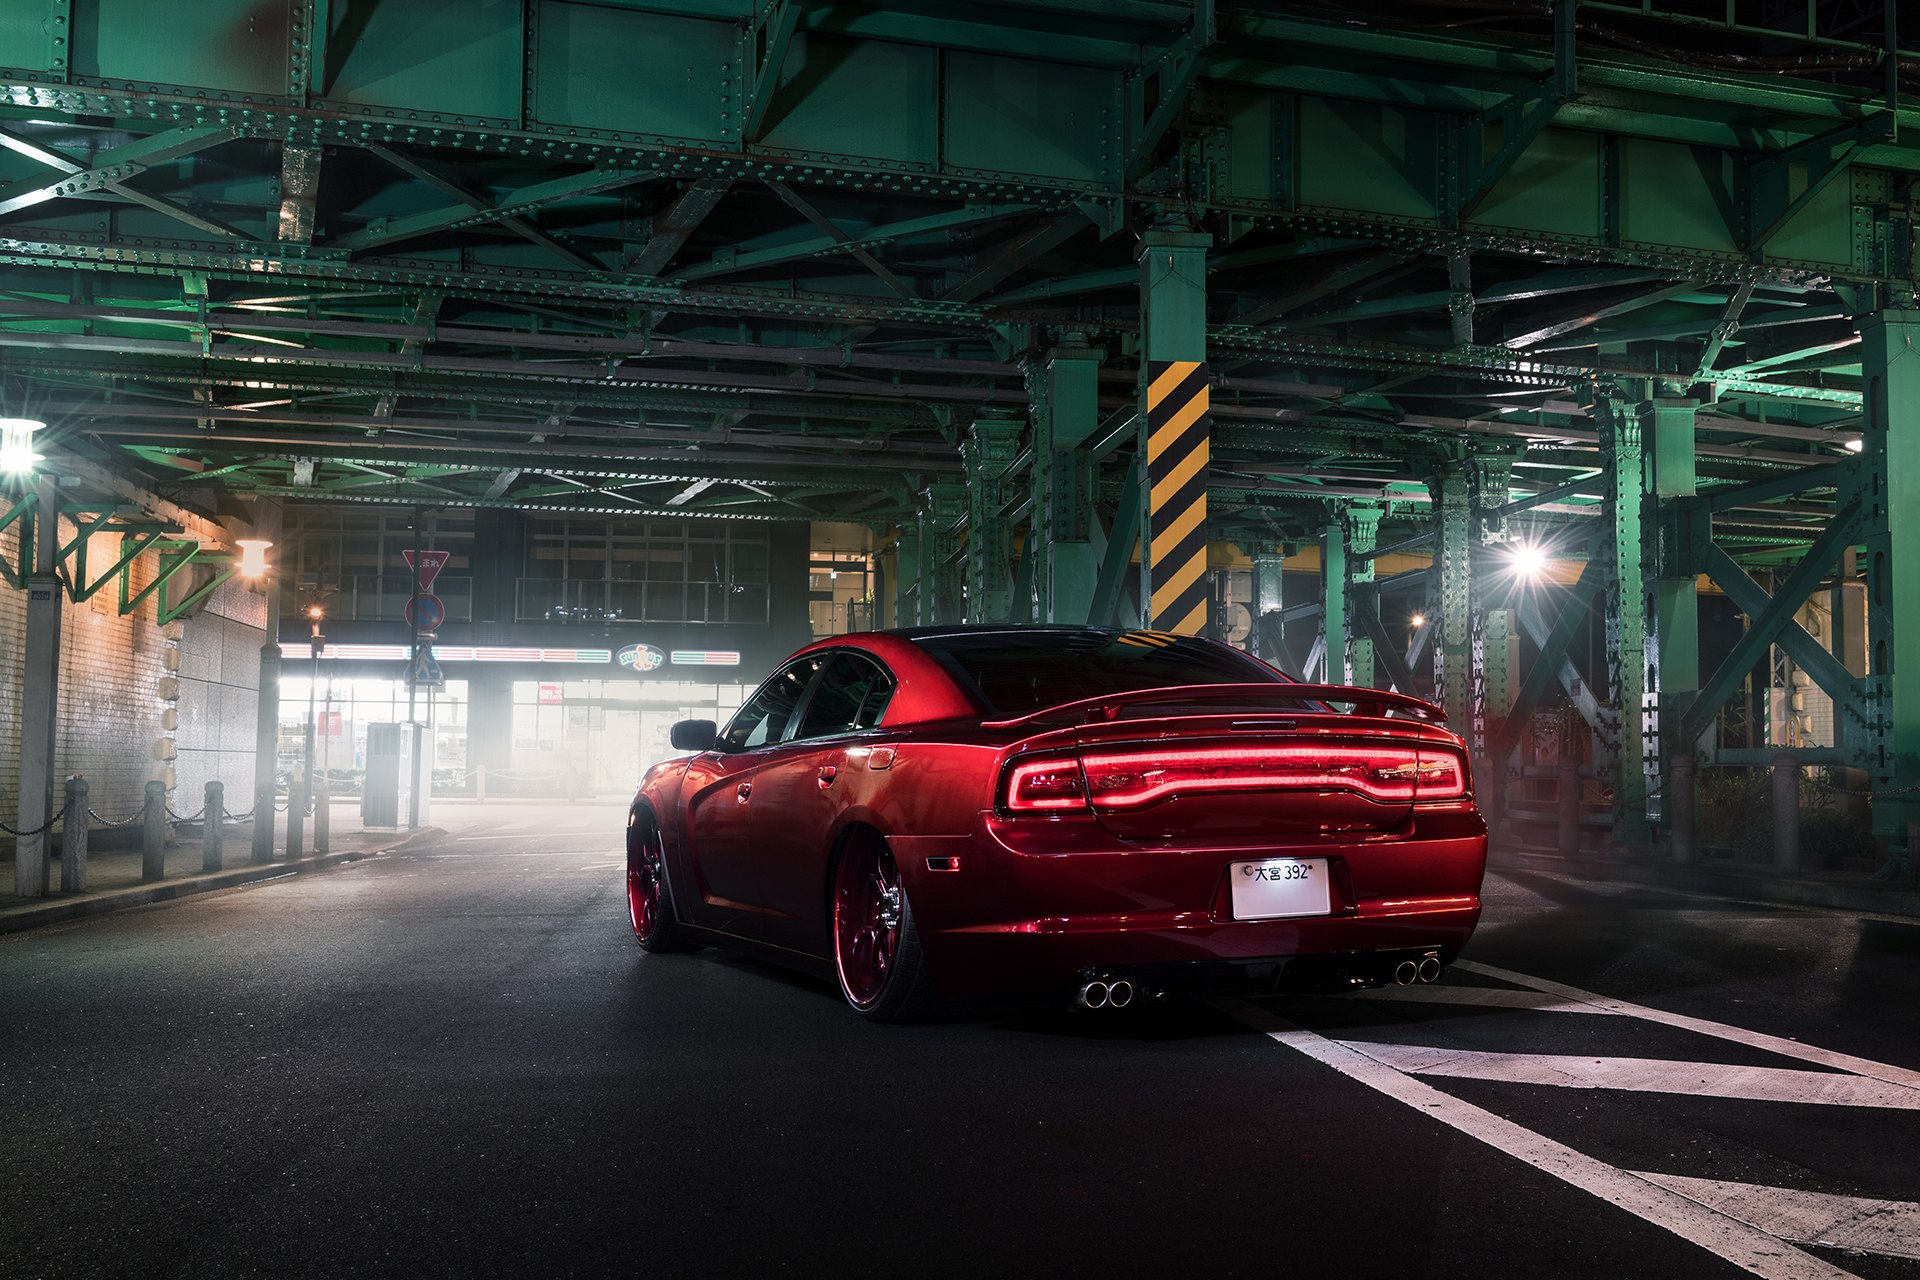 Aftermarket Rear Spoiler on Red Dodge Charger - Photo by Forgiato